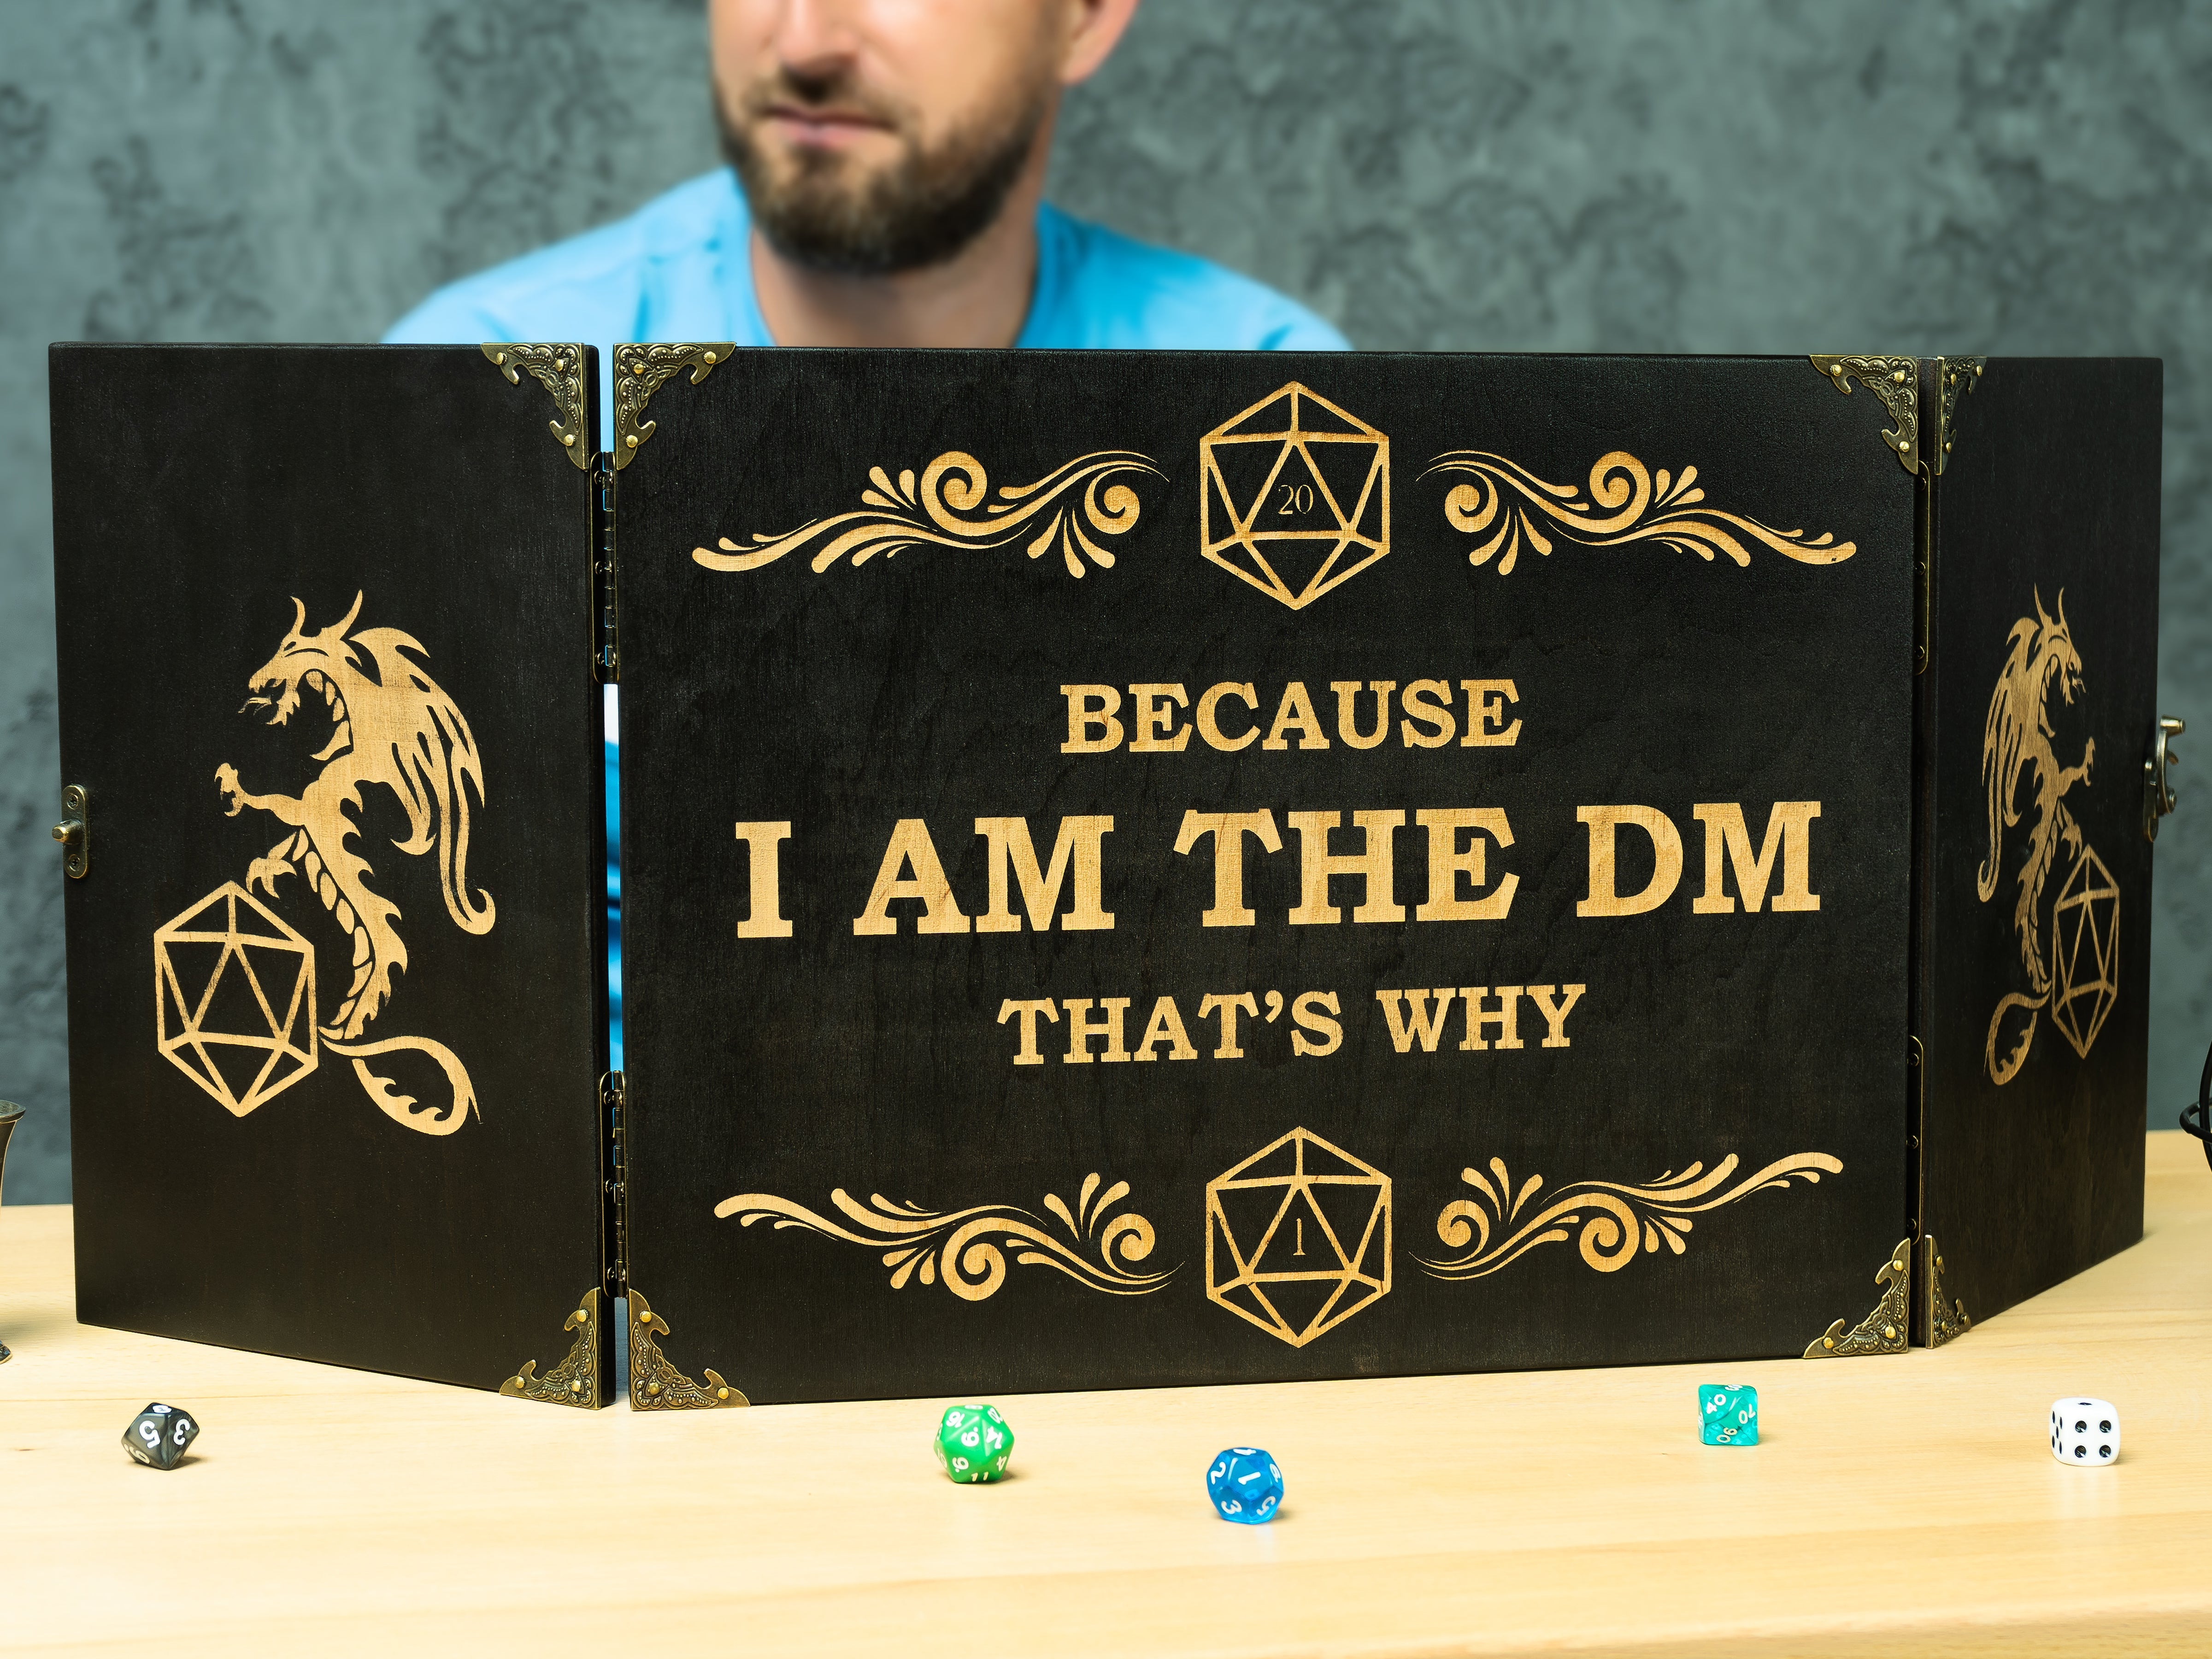 Dungeon Master wood screen "Because I am DM that is why", Dungeon master screens - GravisCup